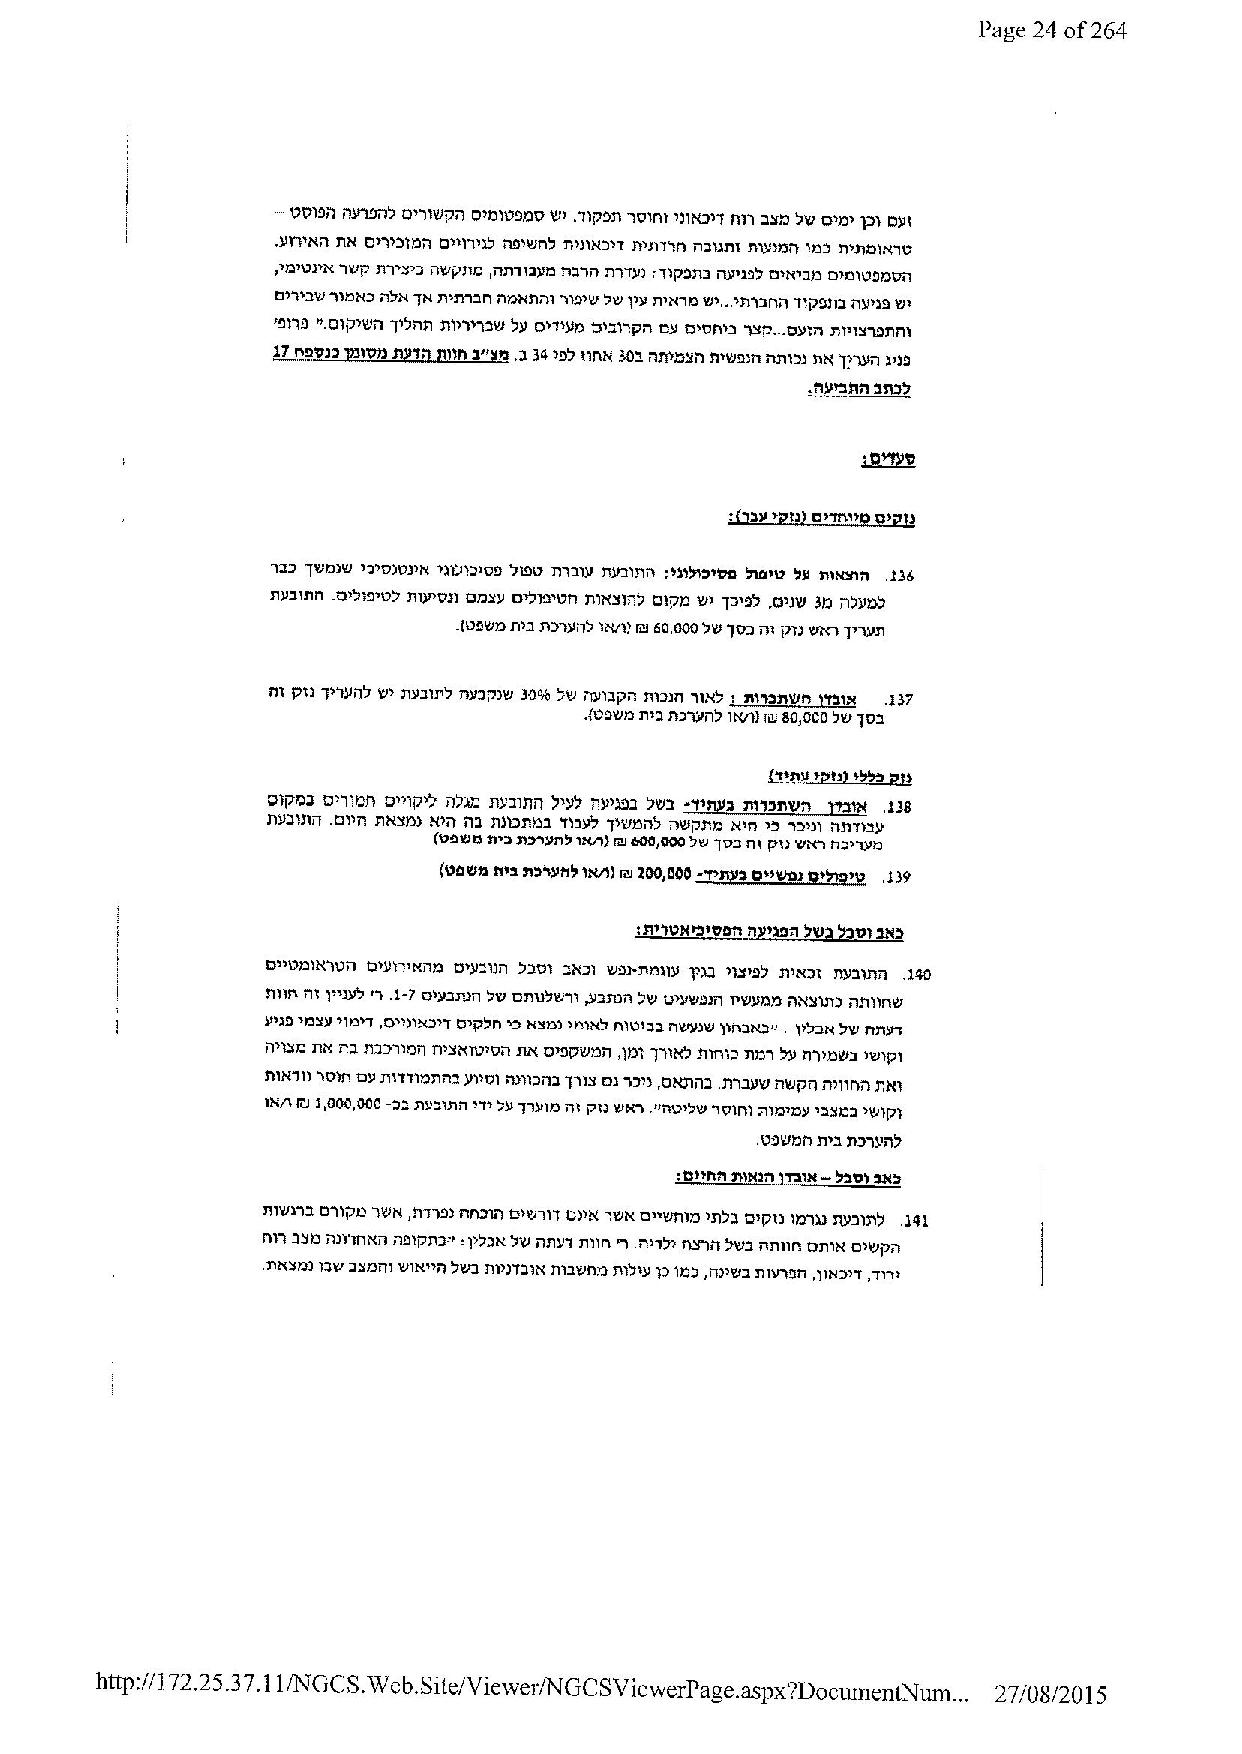 document-page-024